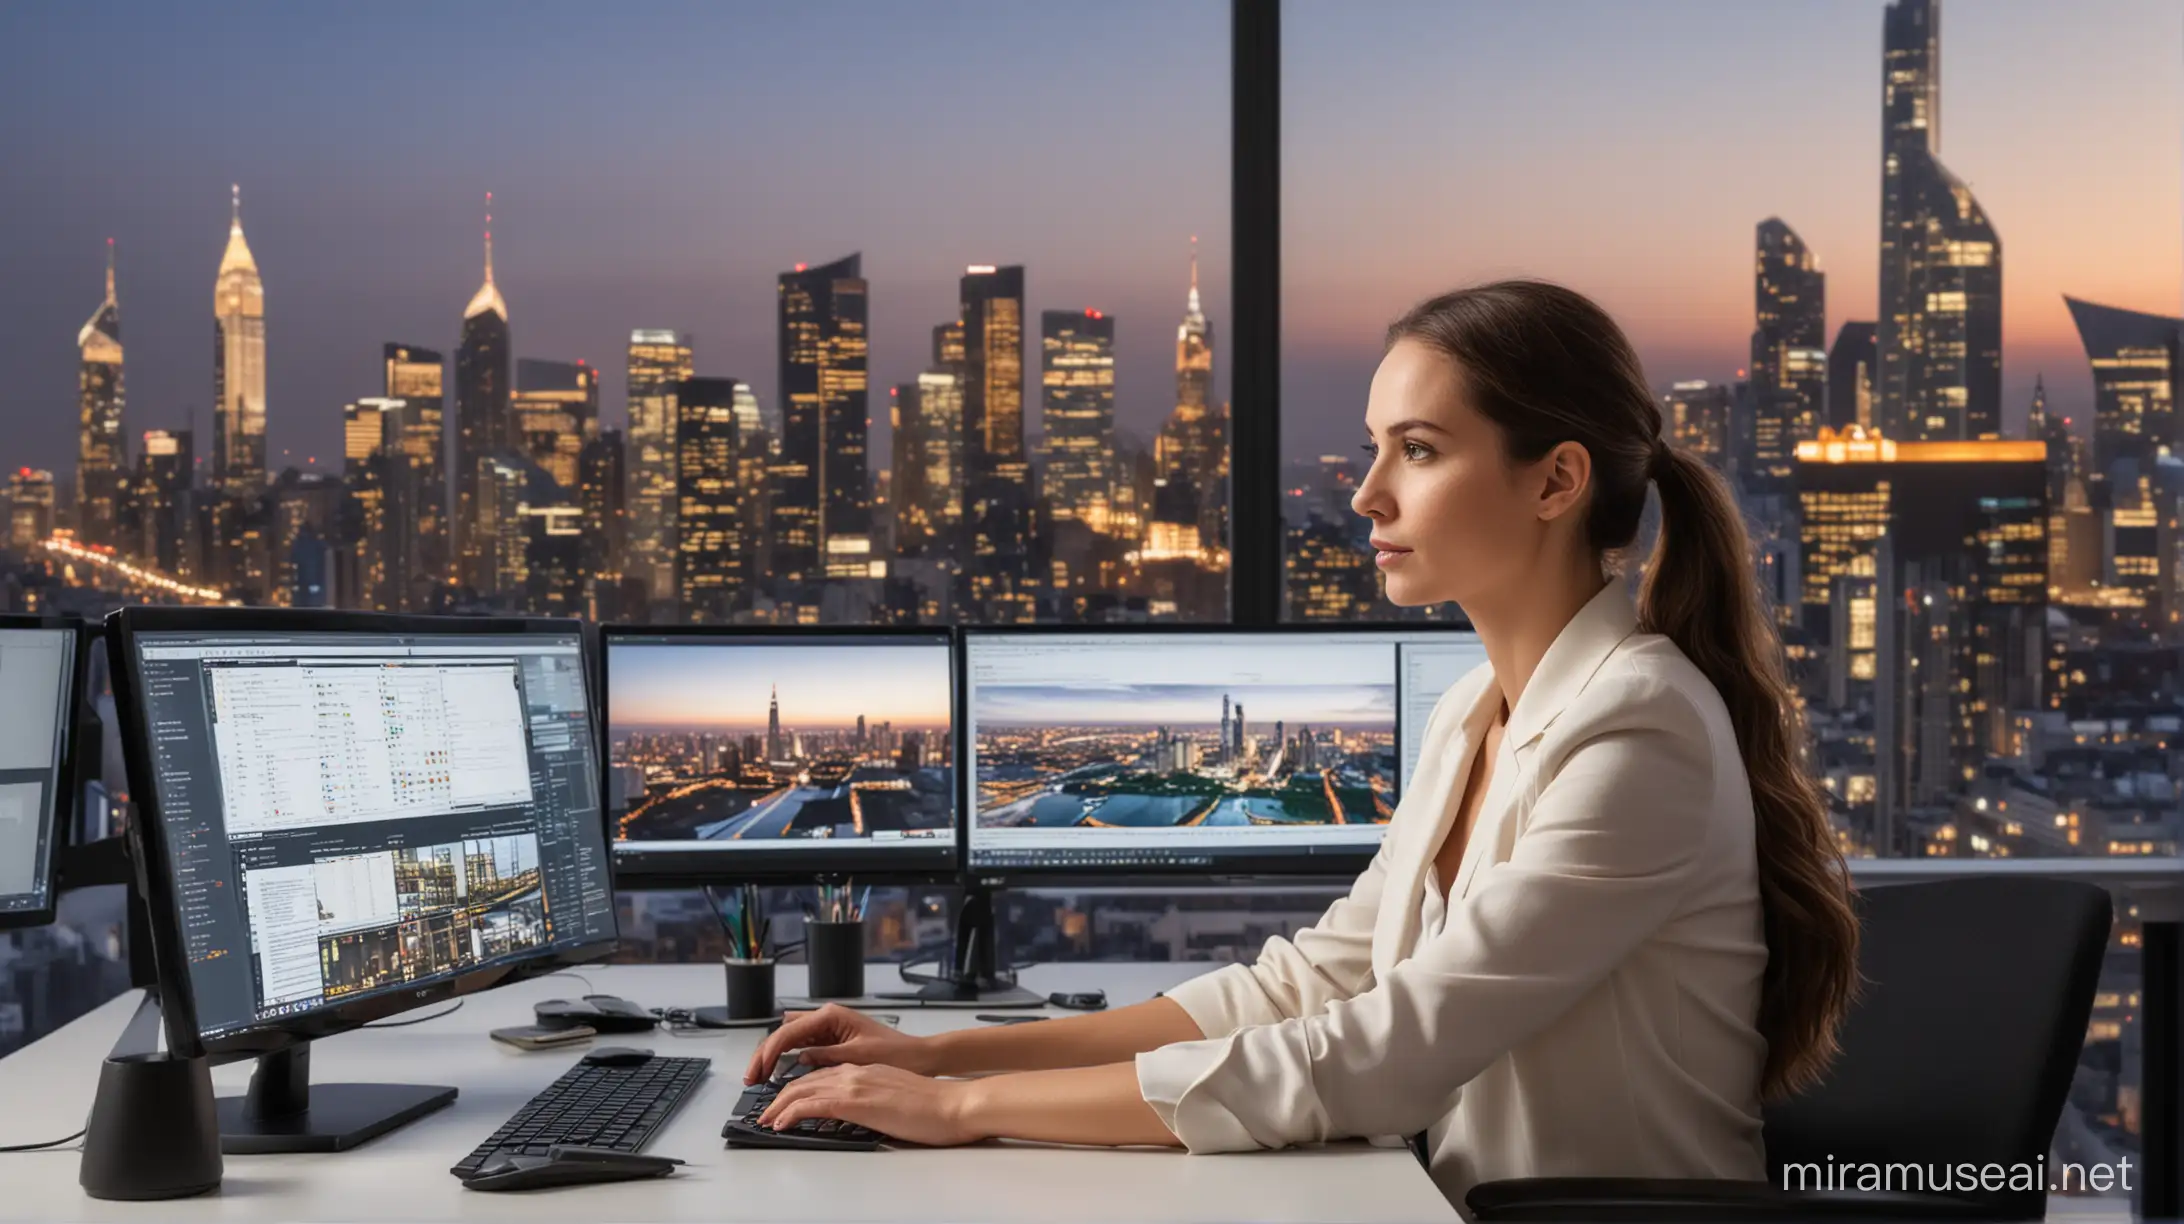 Female Enterprise Architect Working Late in Modern Office with City View